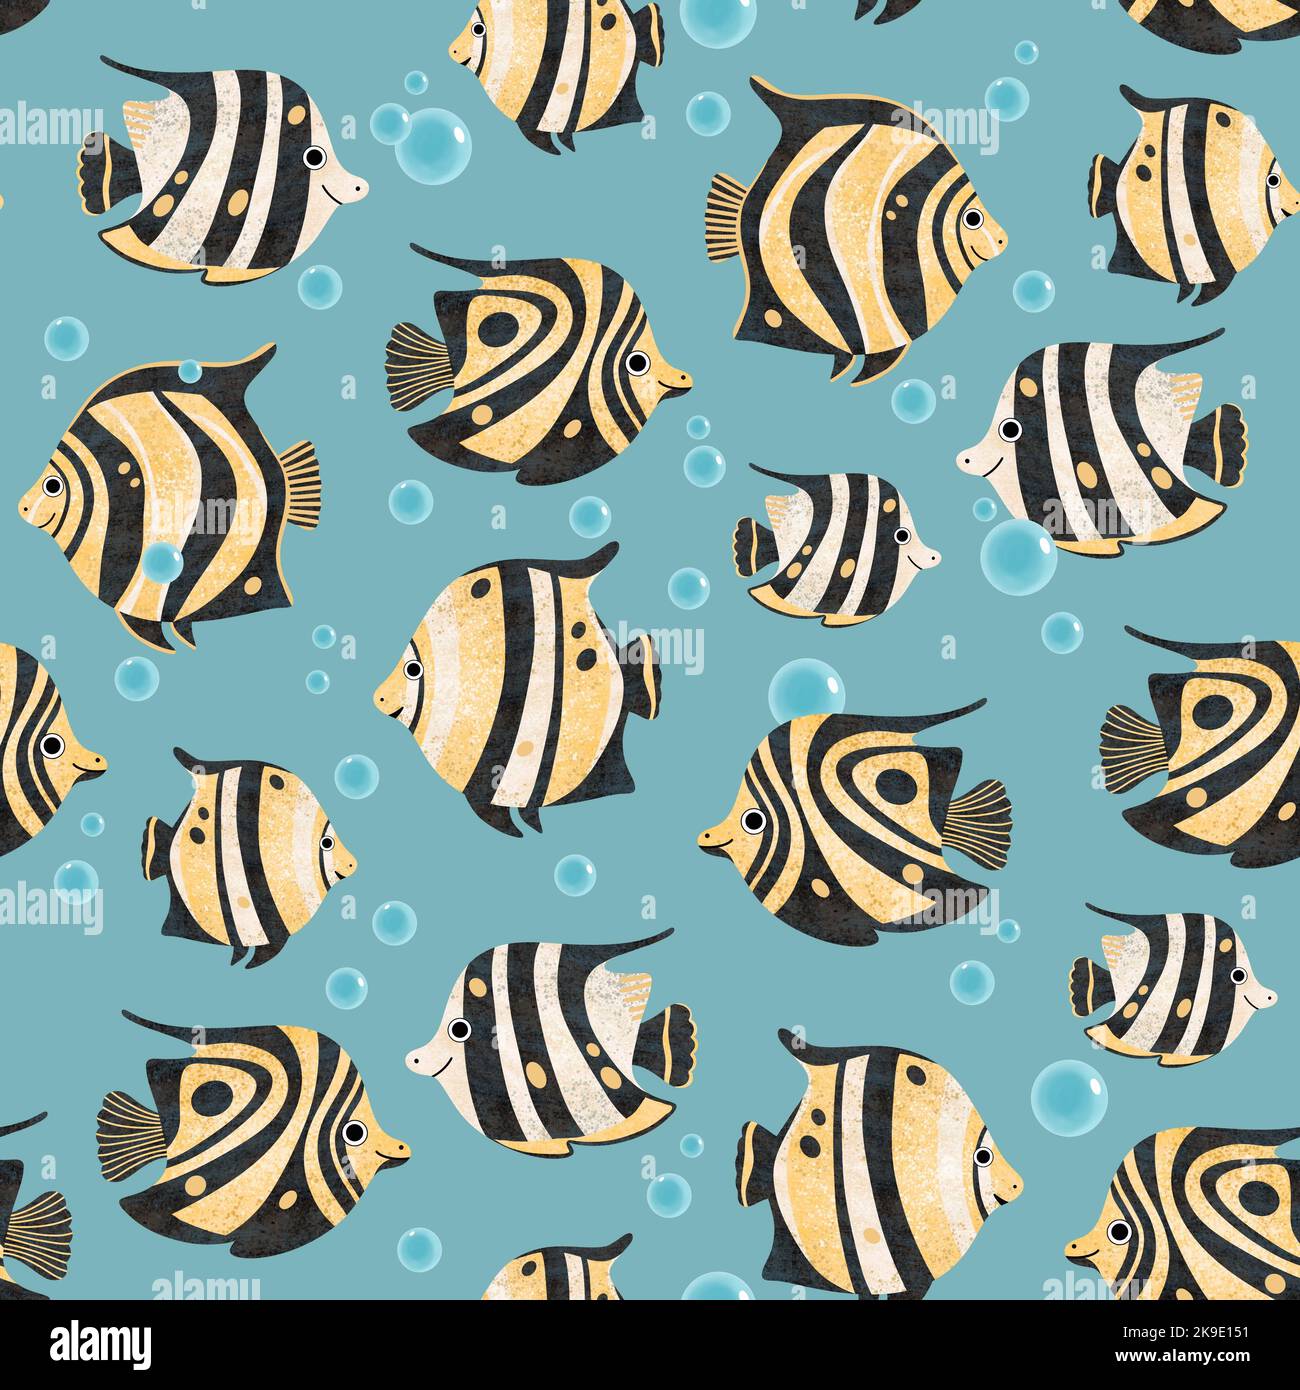 Trendy seamless pattern with cute coral fish. Butterfly fish and water bubbles on blue background. Hand drawn illustration for print. Stock Photo